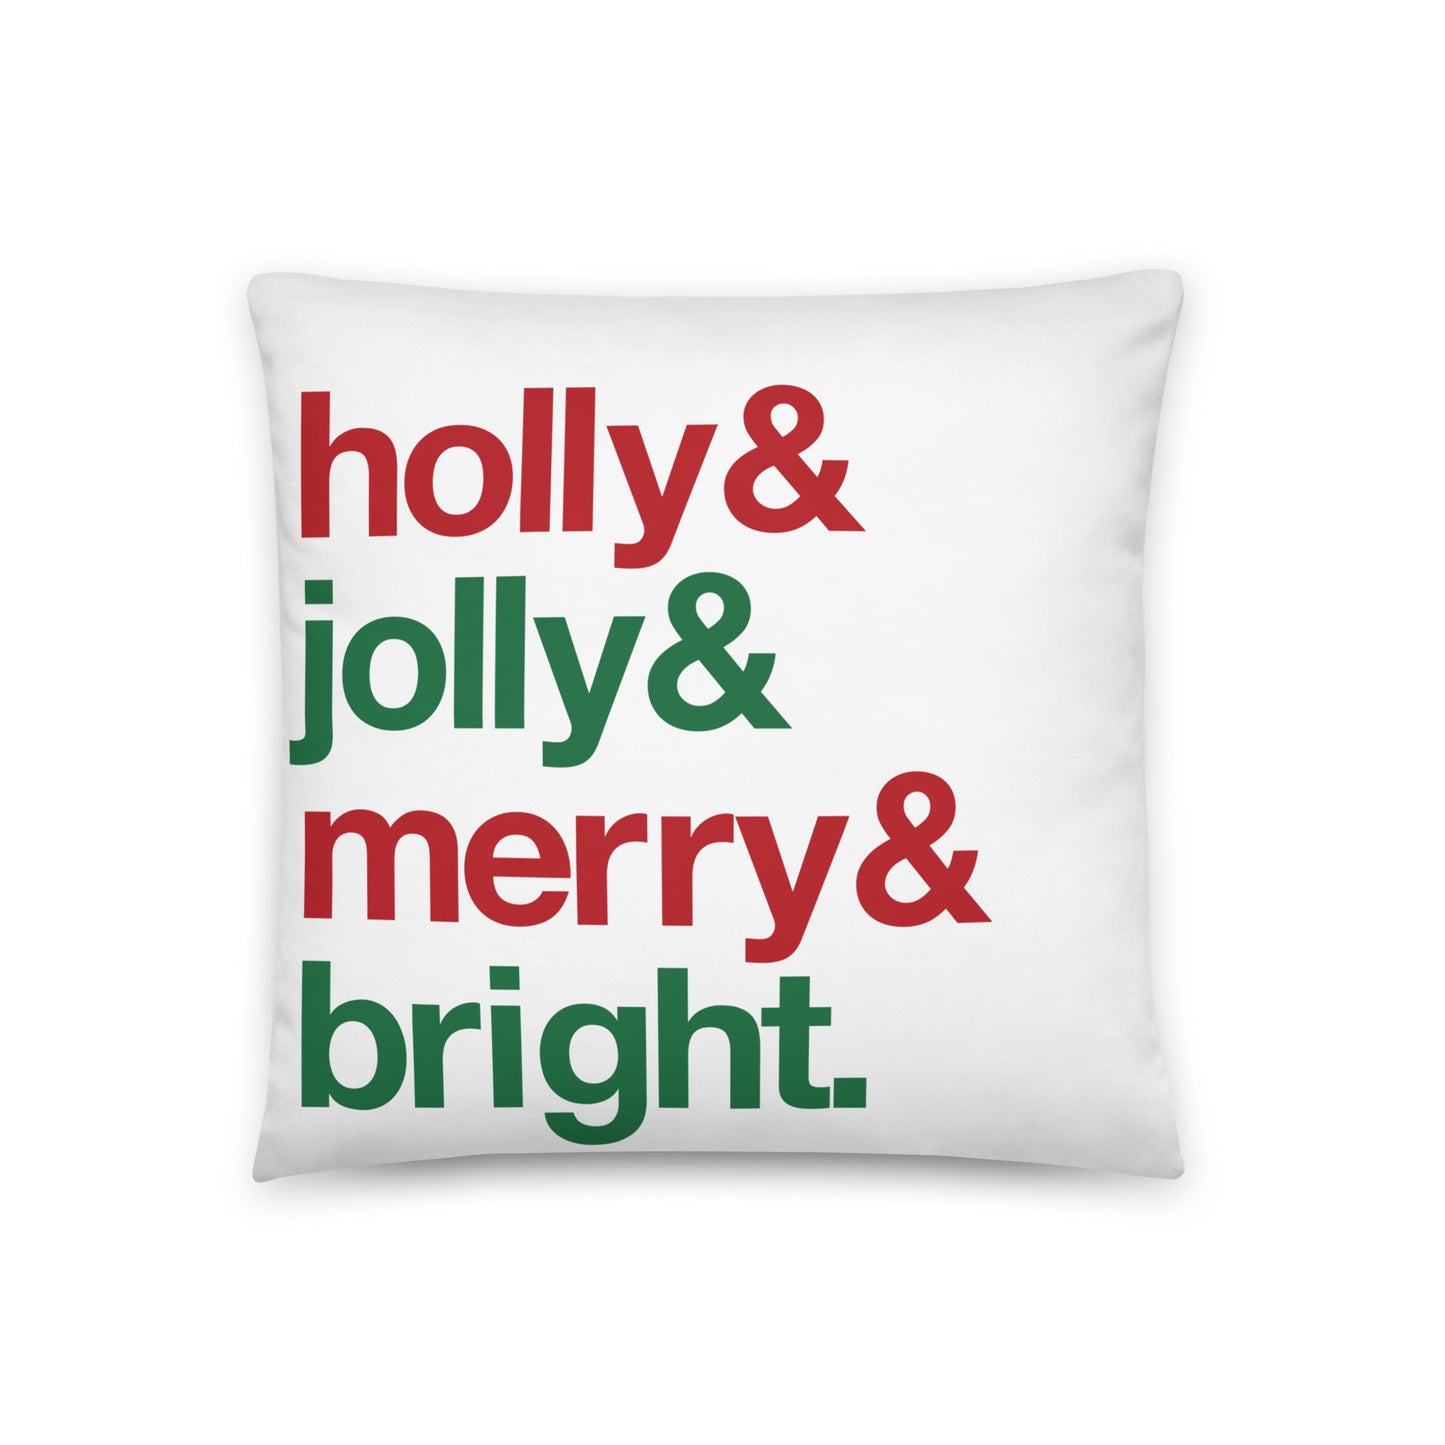 An 18" by 18" throw pillow decorated with four lines of red and green text that read "Holly & jolly & merry & bright". 